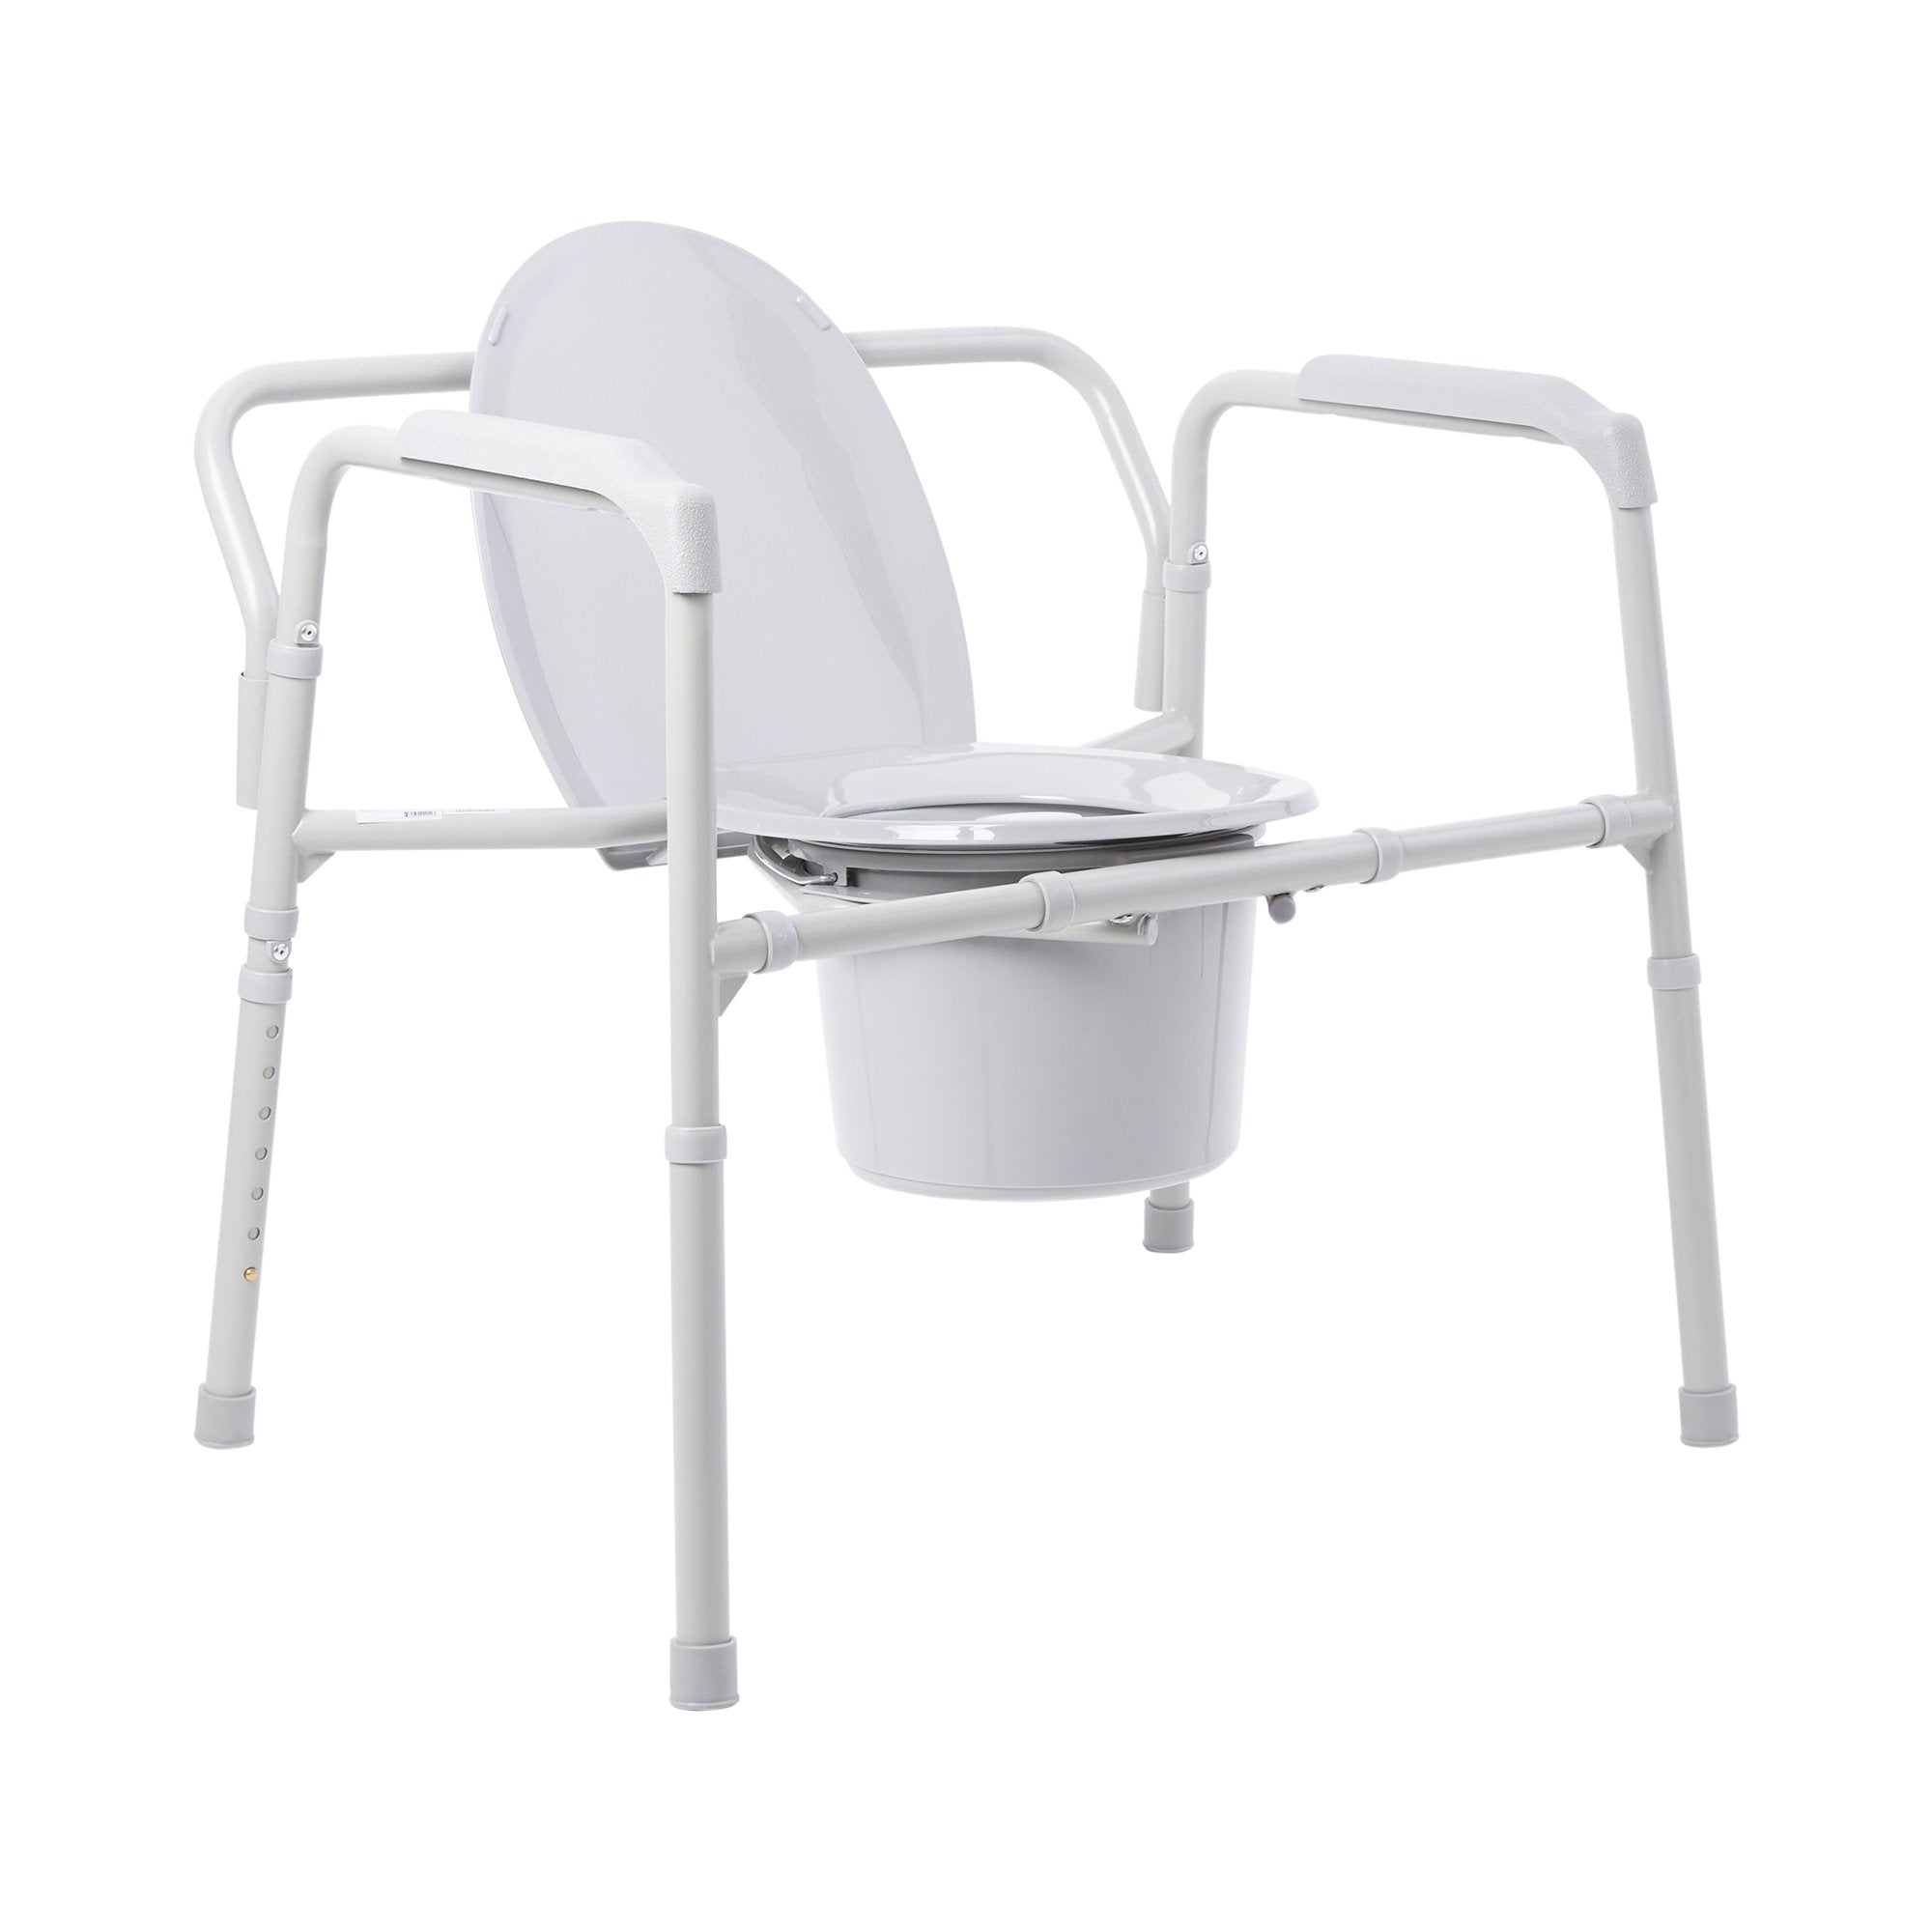 McKesson Fixed Arm Steel Folding Commode Chair, 15½ – 22 Inch -Each